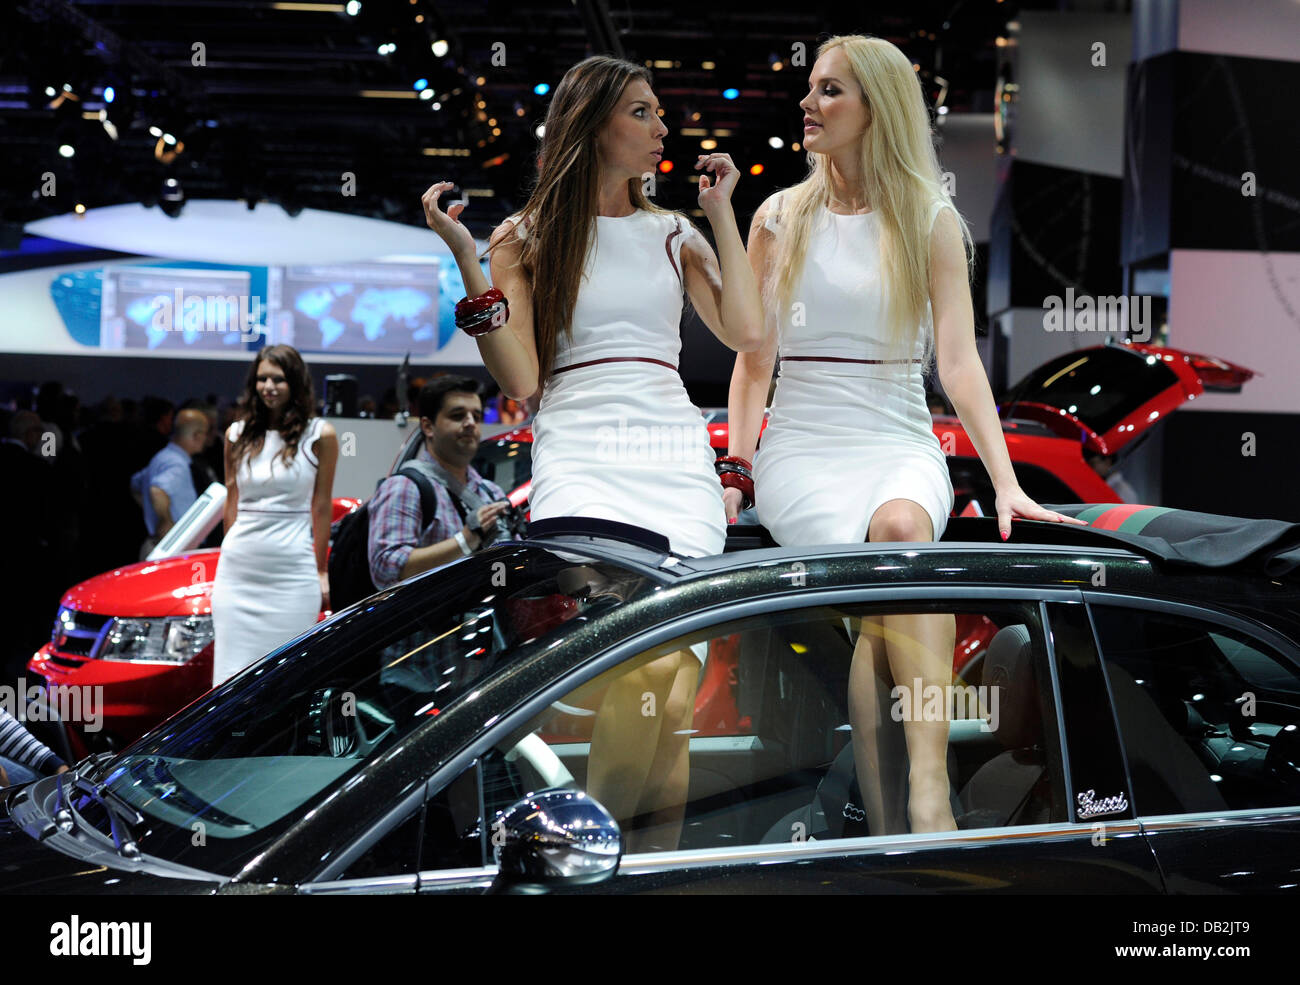 Hostesses sit on a Fiat at the International Motor Show IAA in Frankfurt,  Germany, 13 September 2011. The International Motor Show IAA in Frankfurt  is one of the world's top motor shows.